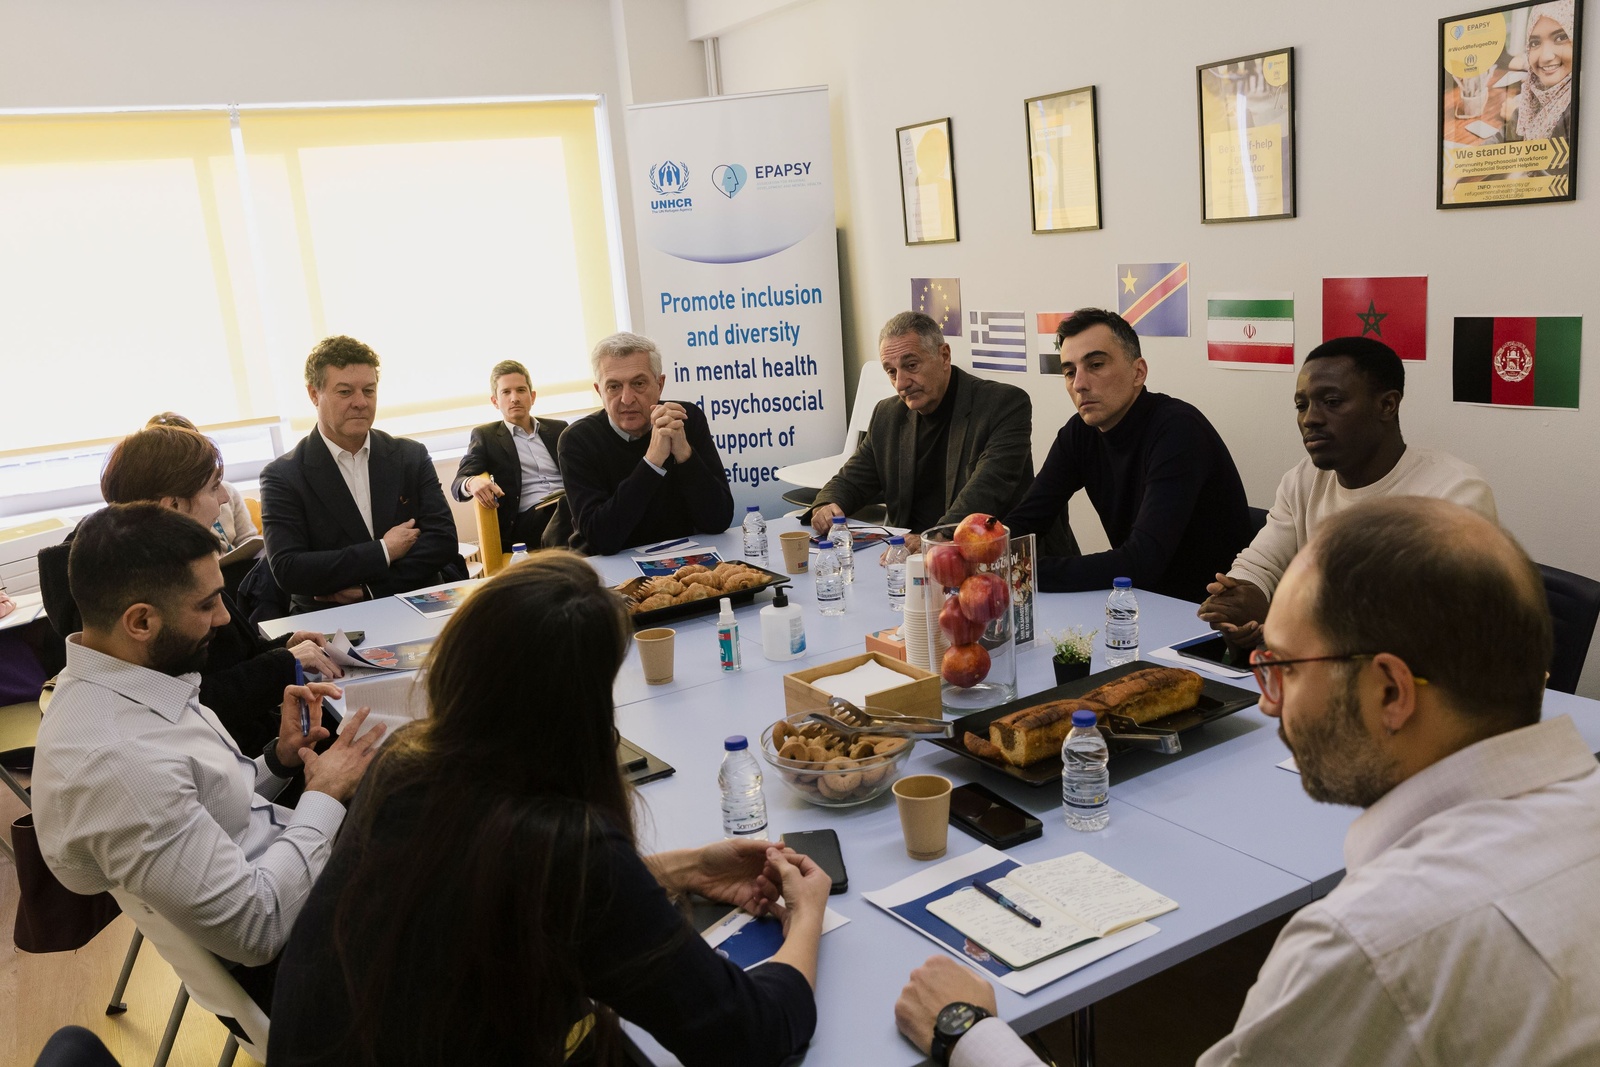 The United Nations High Commissioner for Refugees, Filippo Grandi, the UNHCR Regional Director for Europe, Philippe Leclerc, and the UNHCR Representative in Greece, Maria Clara Martin, during a meeting with counselors of the UNHCR-funded community psychosocial support project EPAPSY.